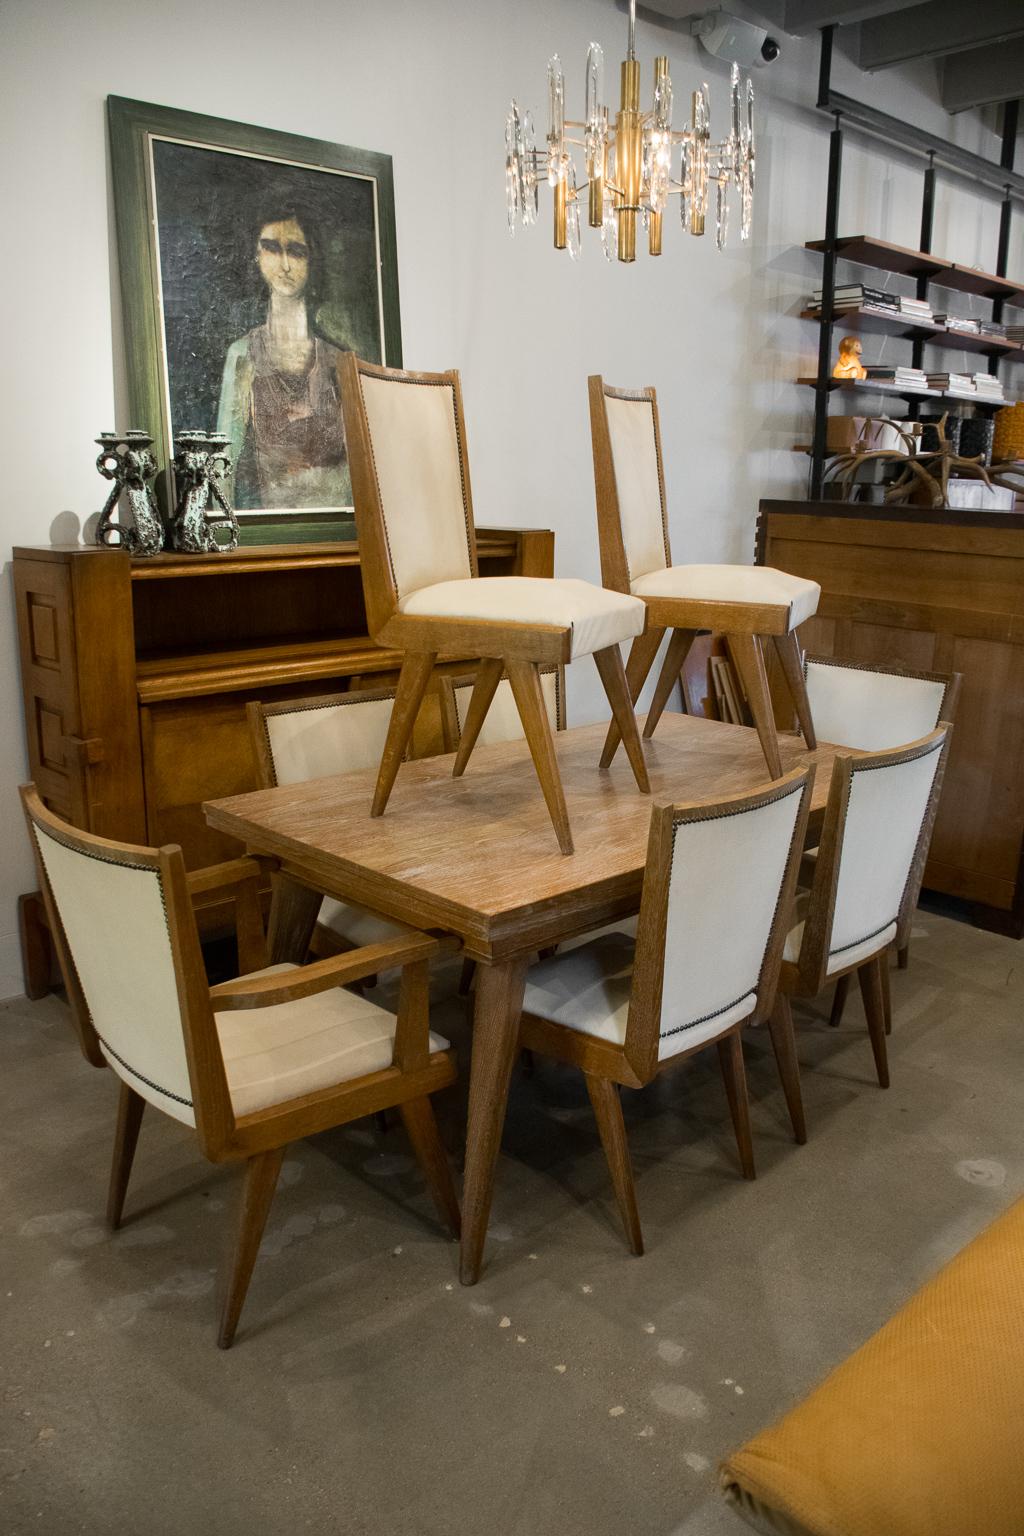 Finely crafted dining room set includes extendable dining table with six side chairs and two arm chairs, attributed to Charles Dudouyt (1885-1946). The set is heavy, constructed of solid French oak in a cerused or limed finish, typical of Dudouyt.